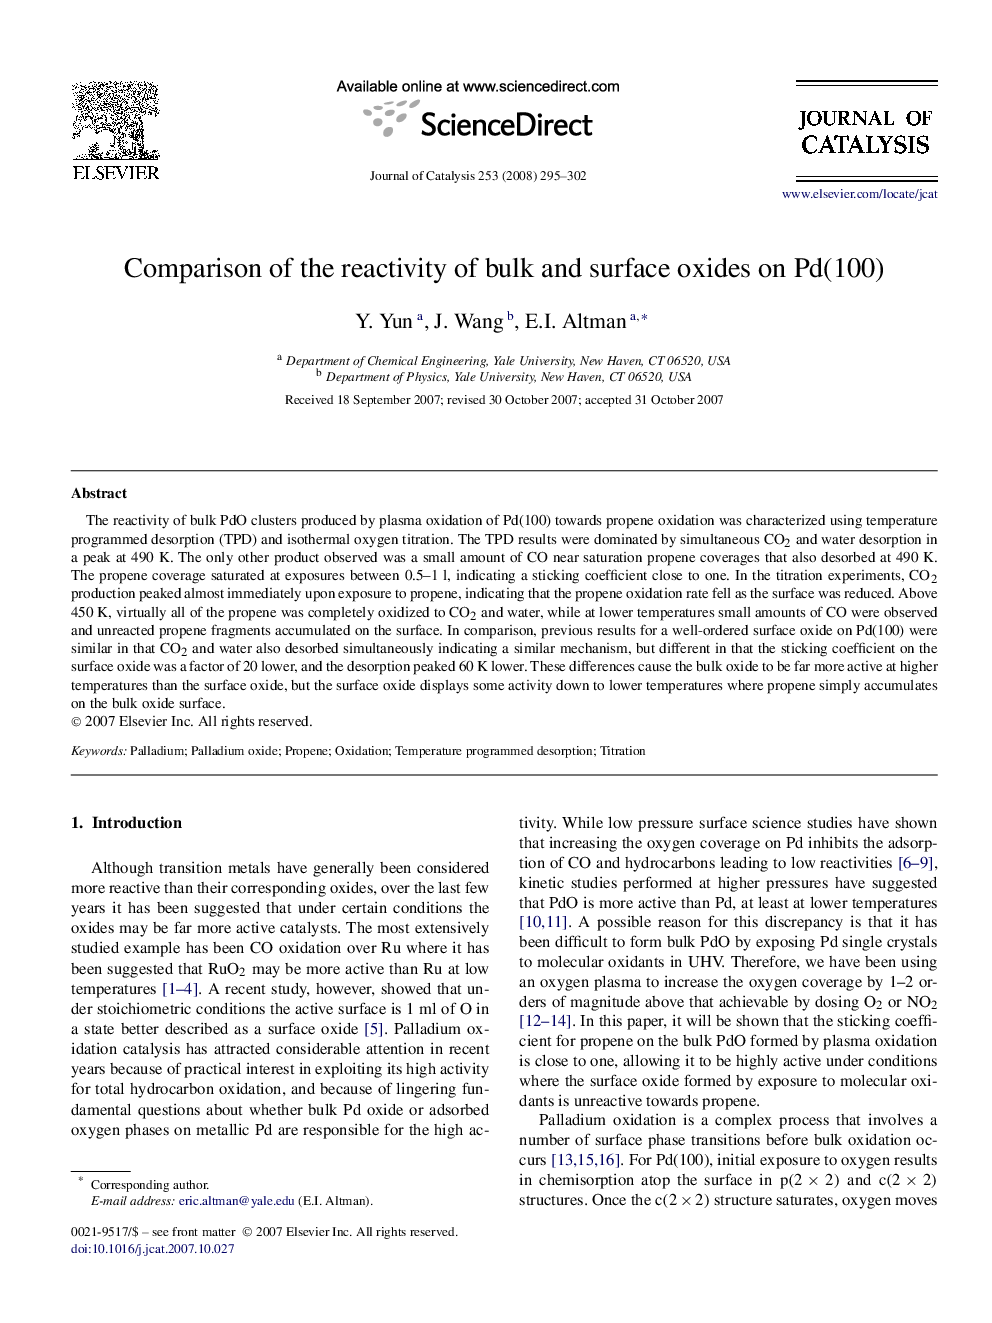 Comparison of the reactivity of bulk and surface oxides on Pd(100)